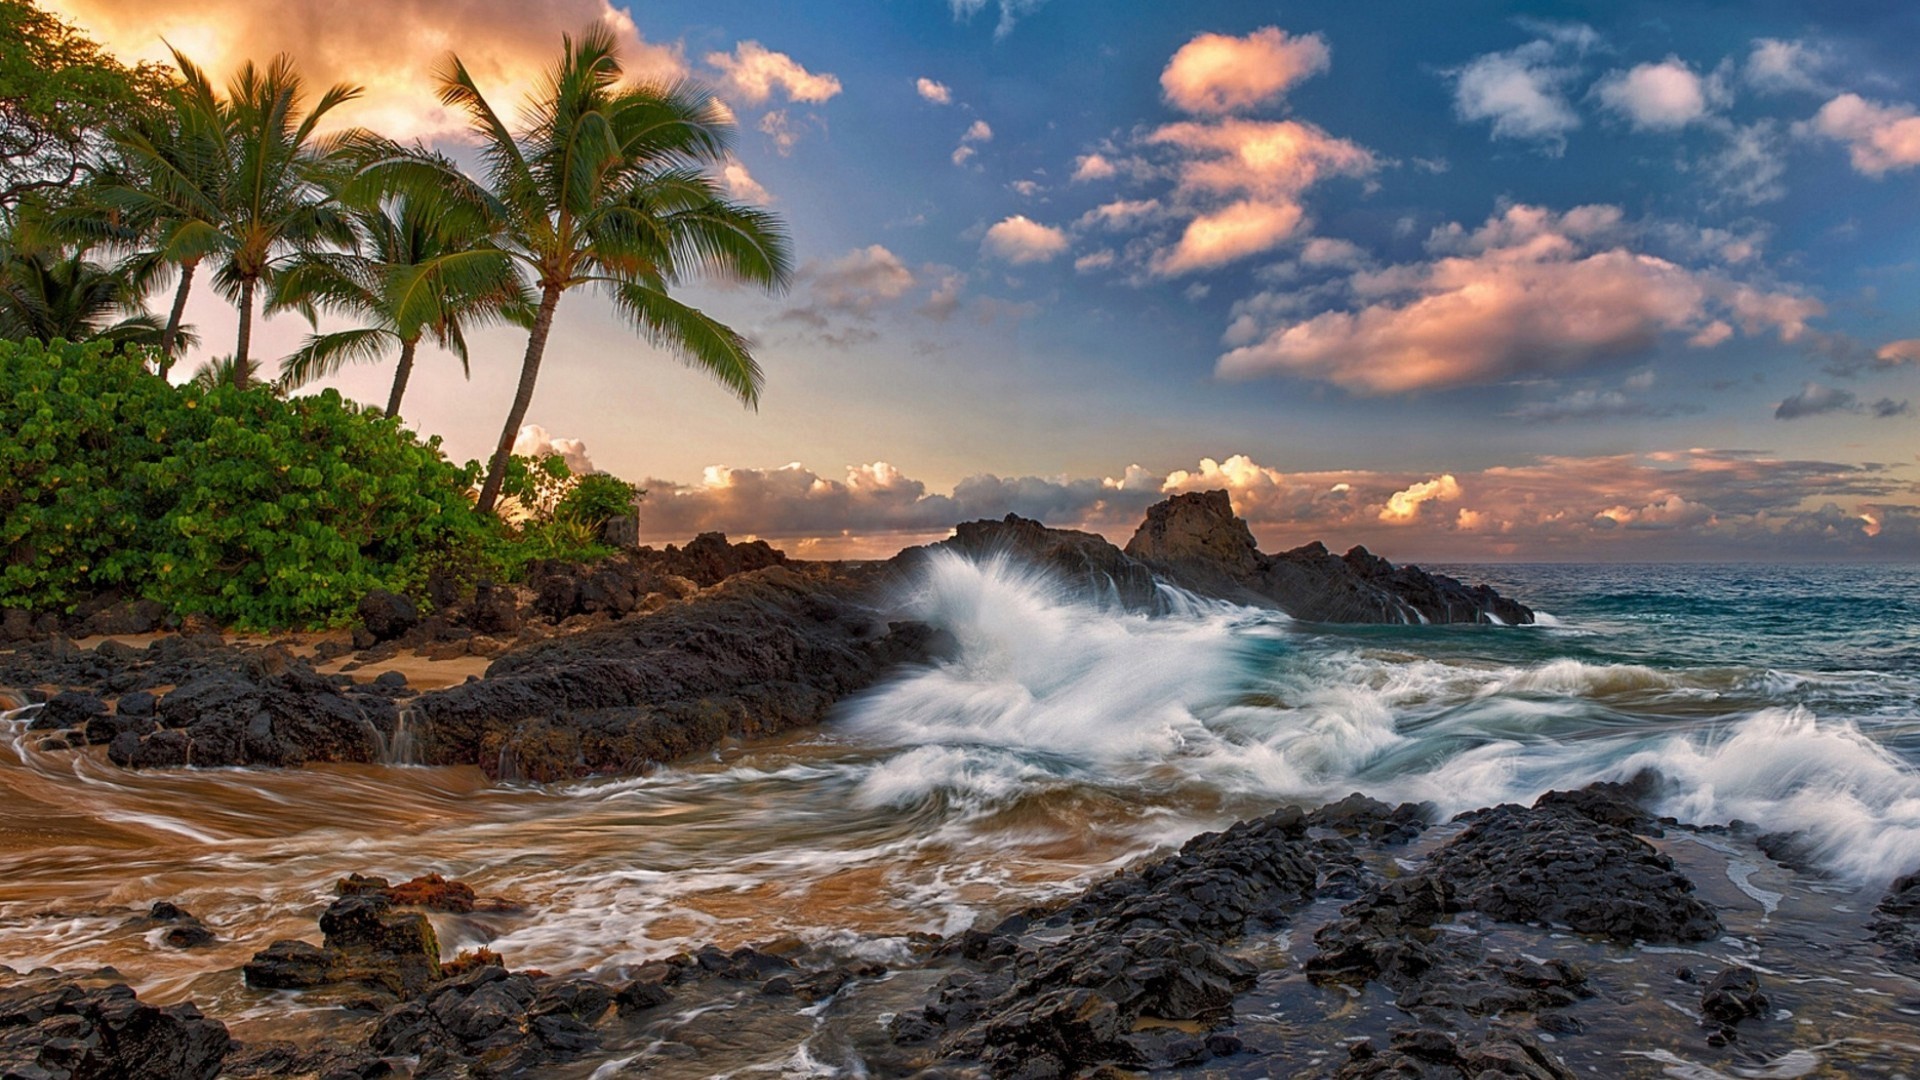 1920x1080 hawaii background wallpaper for computer free